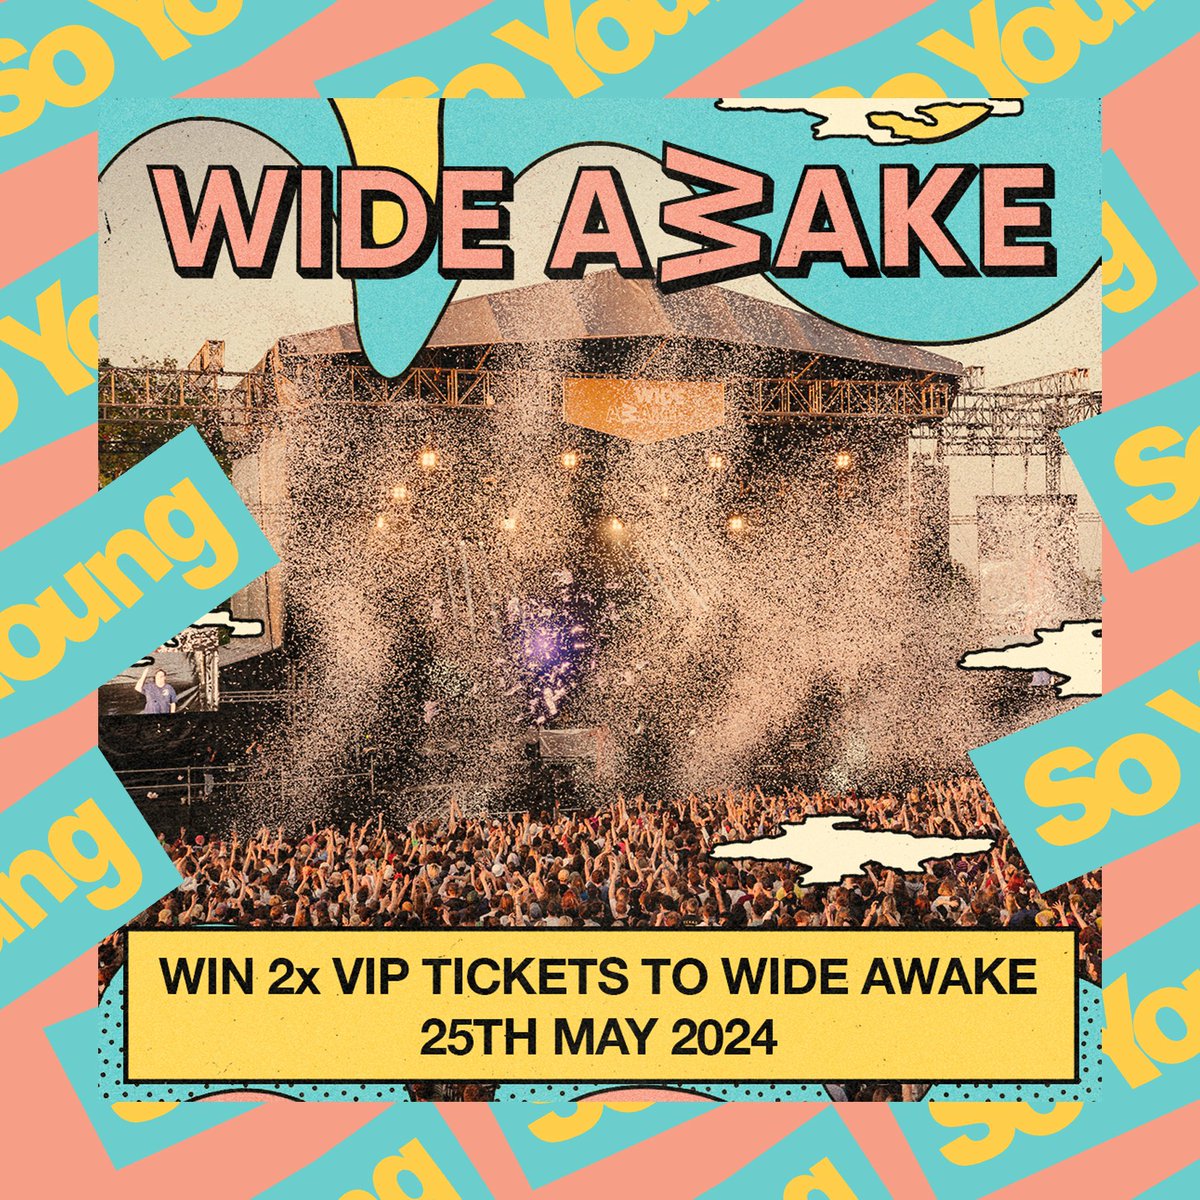 We've got x2 VIP @wideawakeldn tickets to give away! Competition closes on Monday 20th May with the winner notified that day. Enter here: soyoungmagazine.com/journal/wide-a…